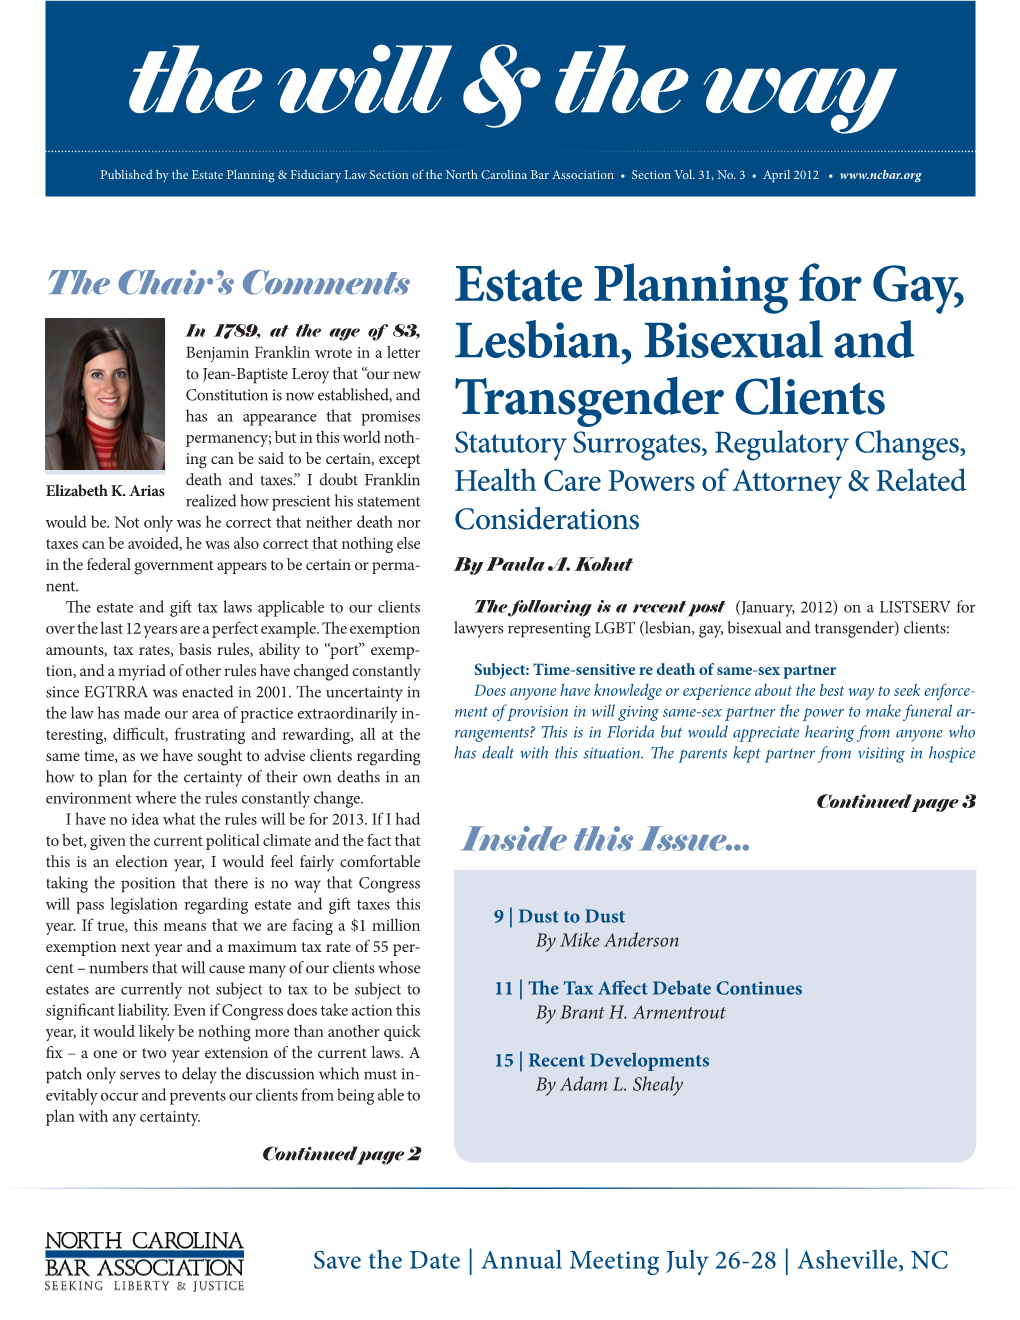 Estate Planning for Gay, Lesbian, Bisexual and Transgender Clients